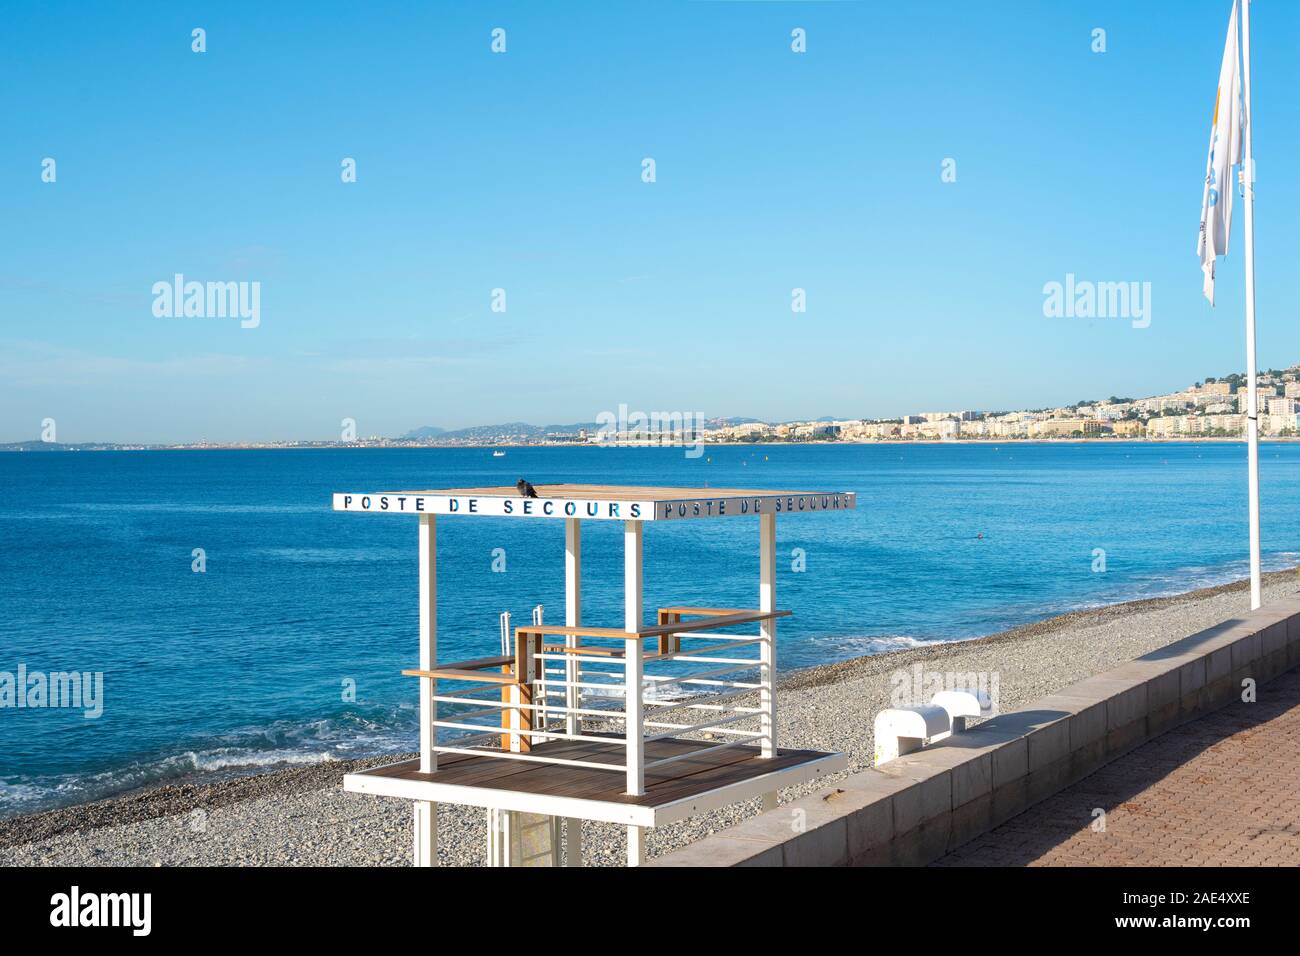 A black pigeons sits atop a Poste de Secours, or First Aid Station on the empty beach of the Bay of Angels on the French Riviera in Nice, France. Stock Photo